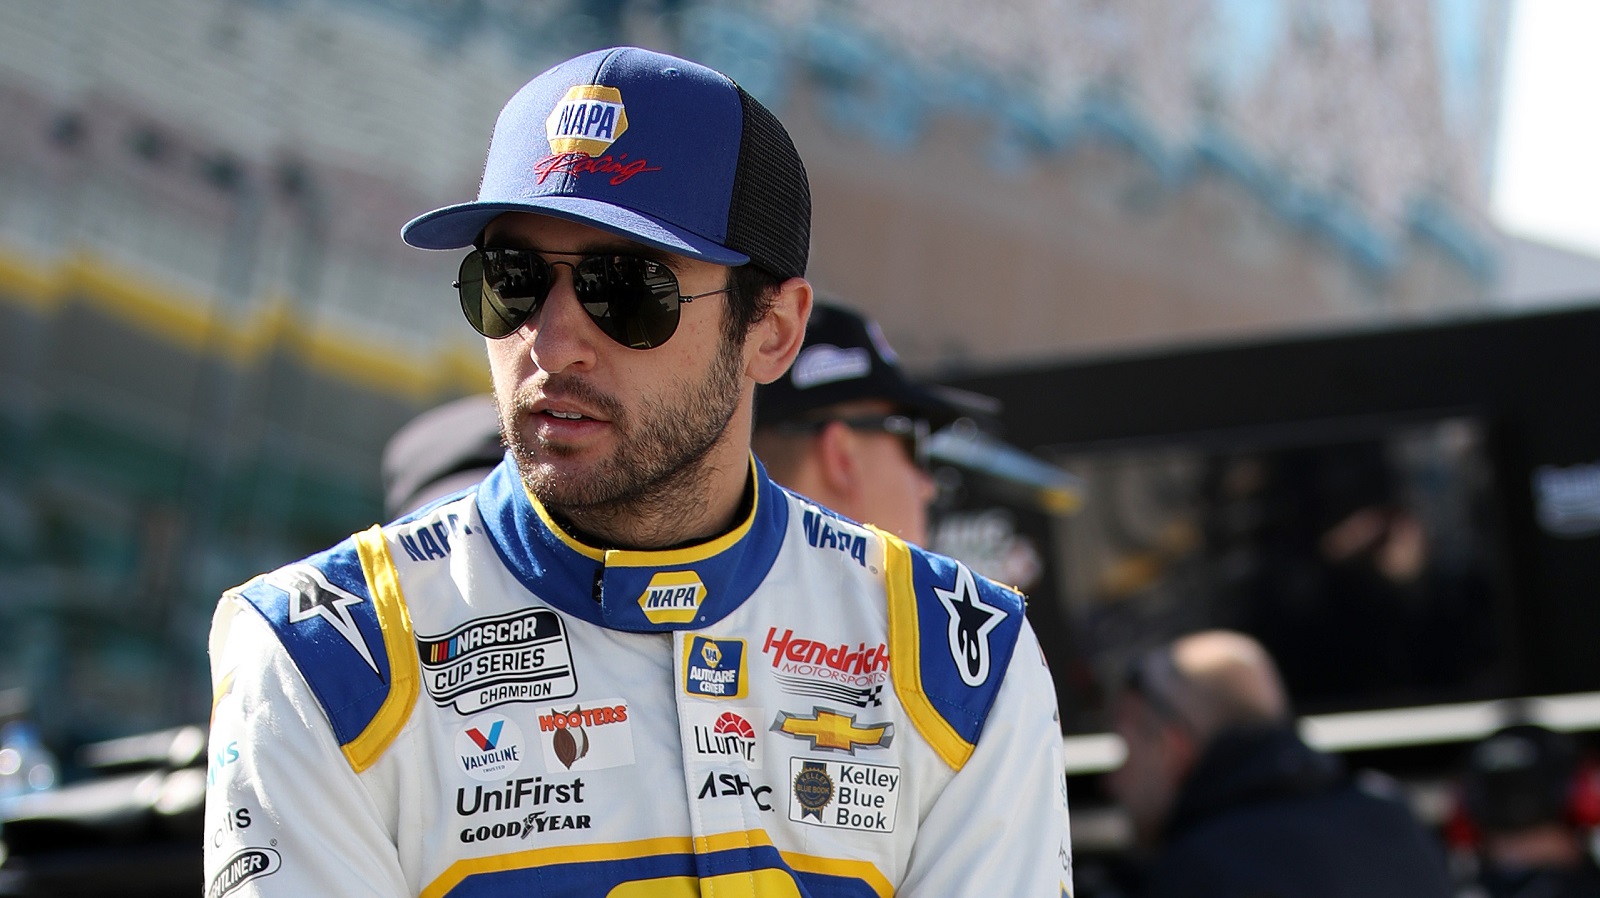 Chase Elliott  talks on the grid during practice for the NASCAR Cup Series Pennzoil 400 at Las Vegas Motor Speedway on March 5, 2022. | Meg Oliphant/Getty Images